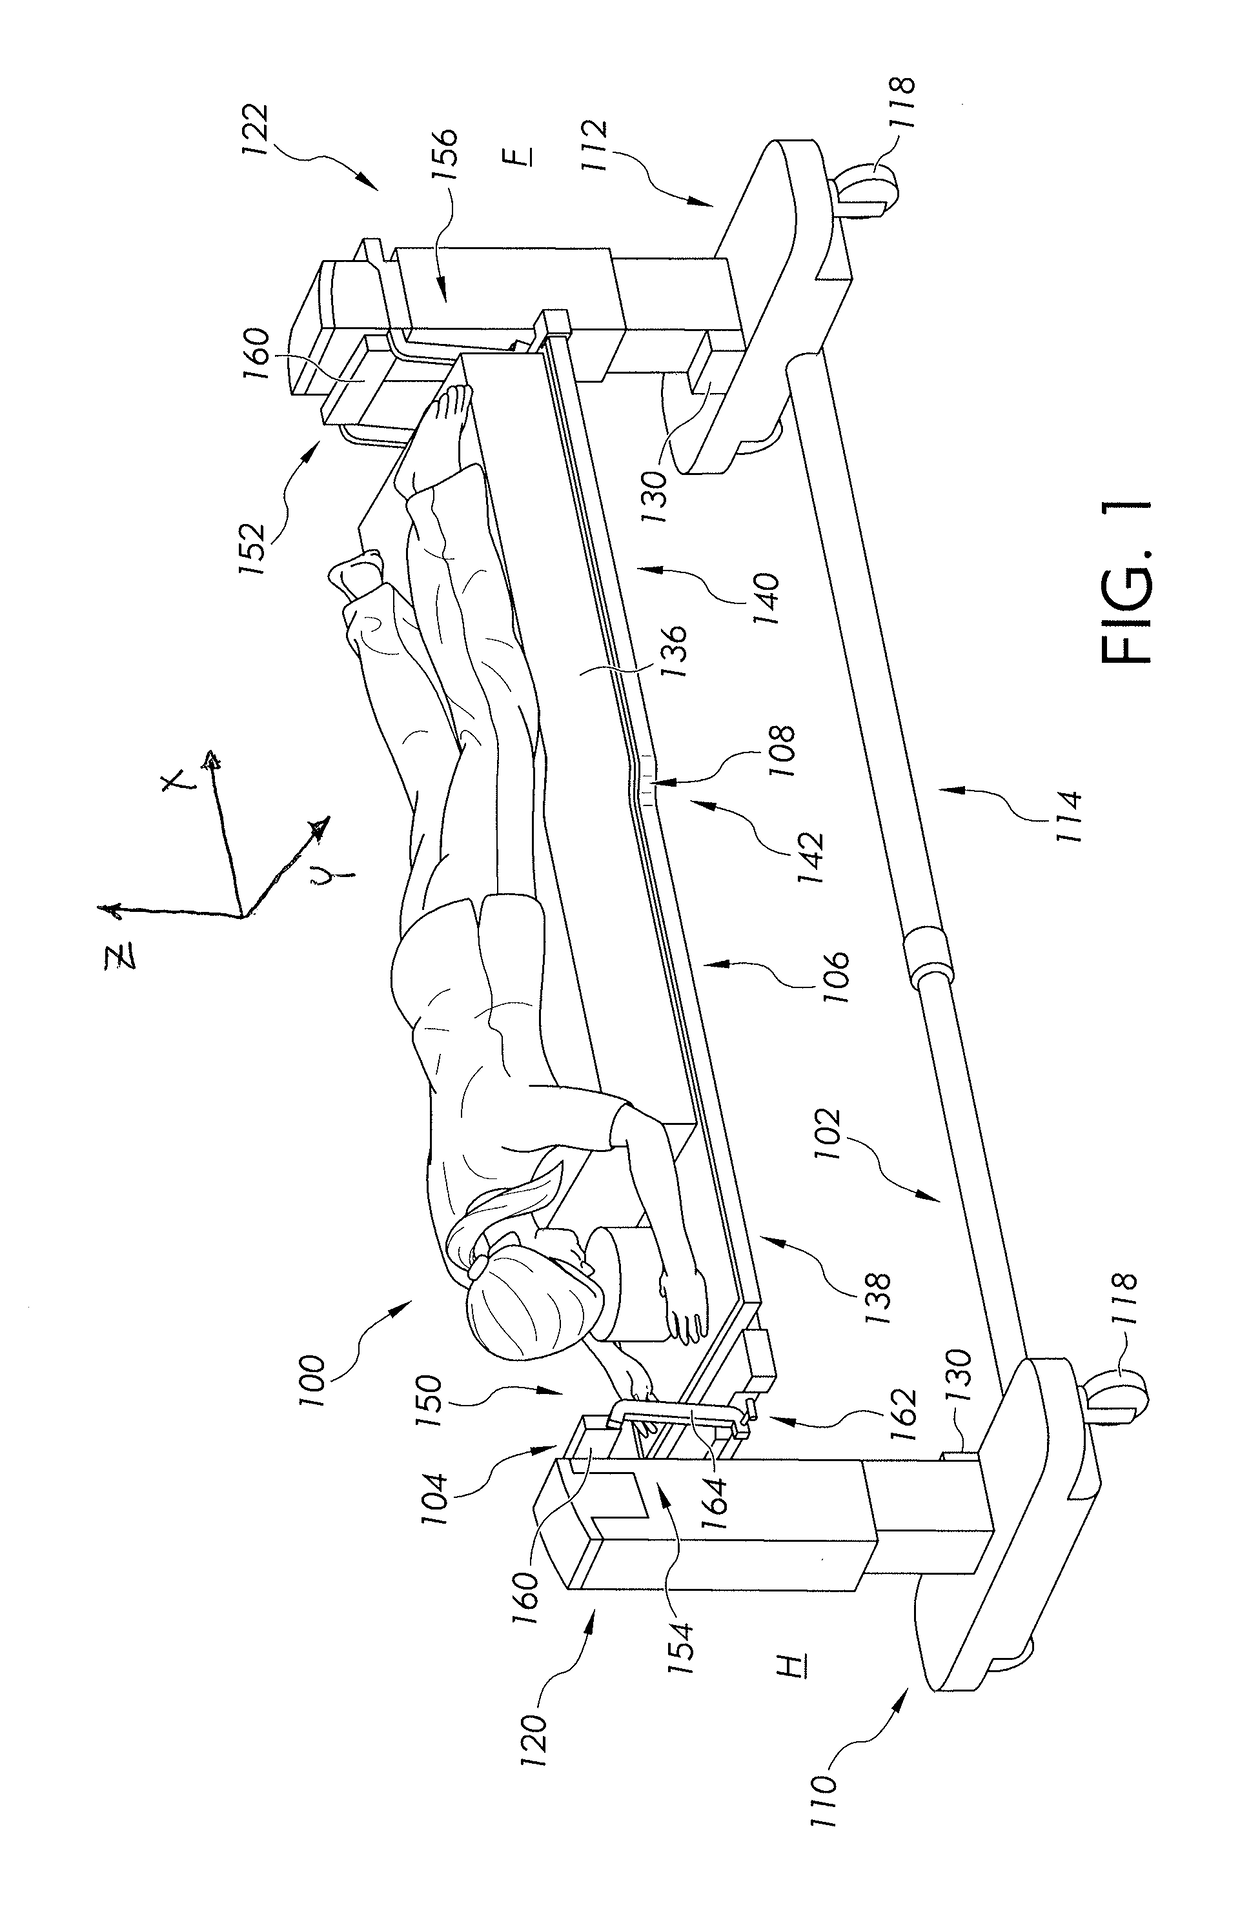 Adjustable cervical traction assemblies for person support apparatuses